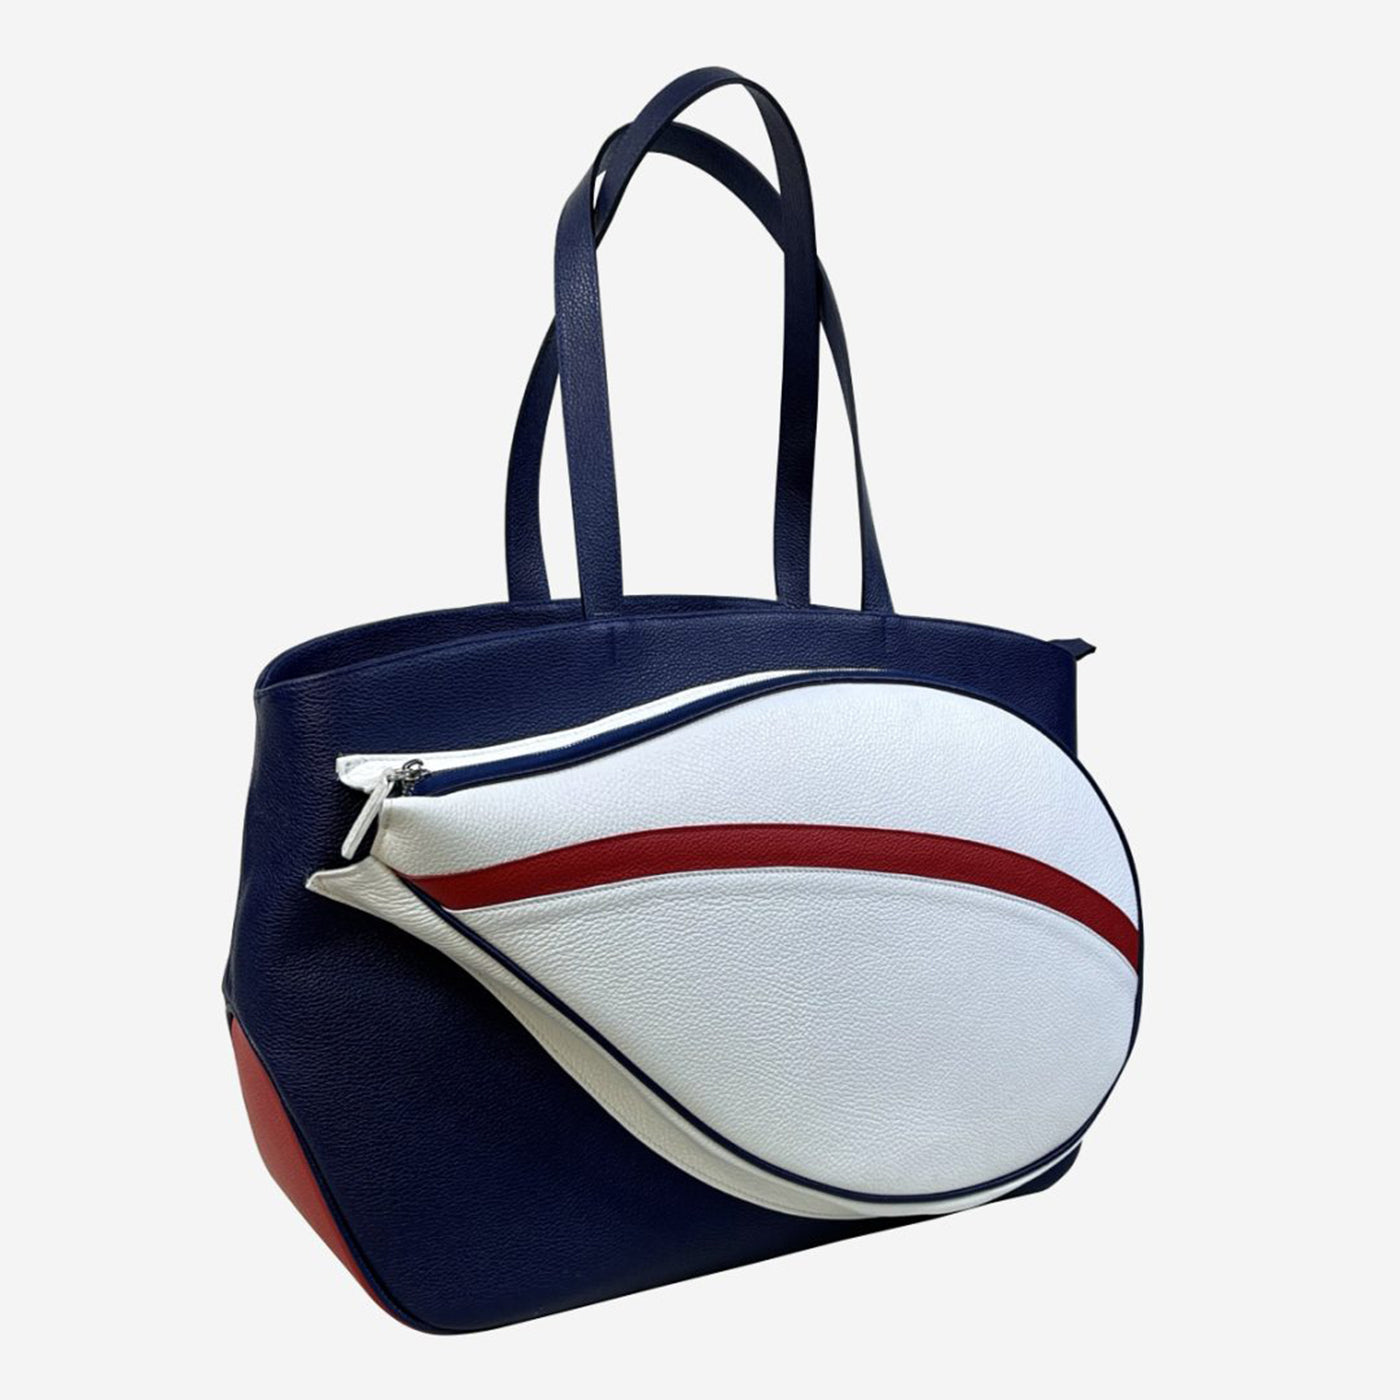 Sport Blue/Red/White Bag With Tennis-Racket-Shaped Pocket - Alternative view 3